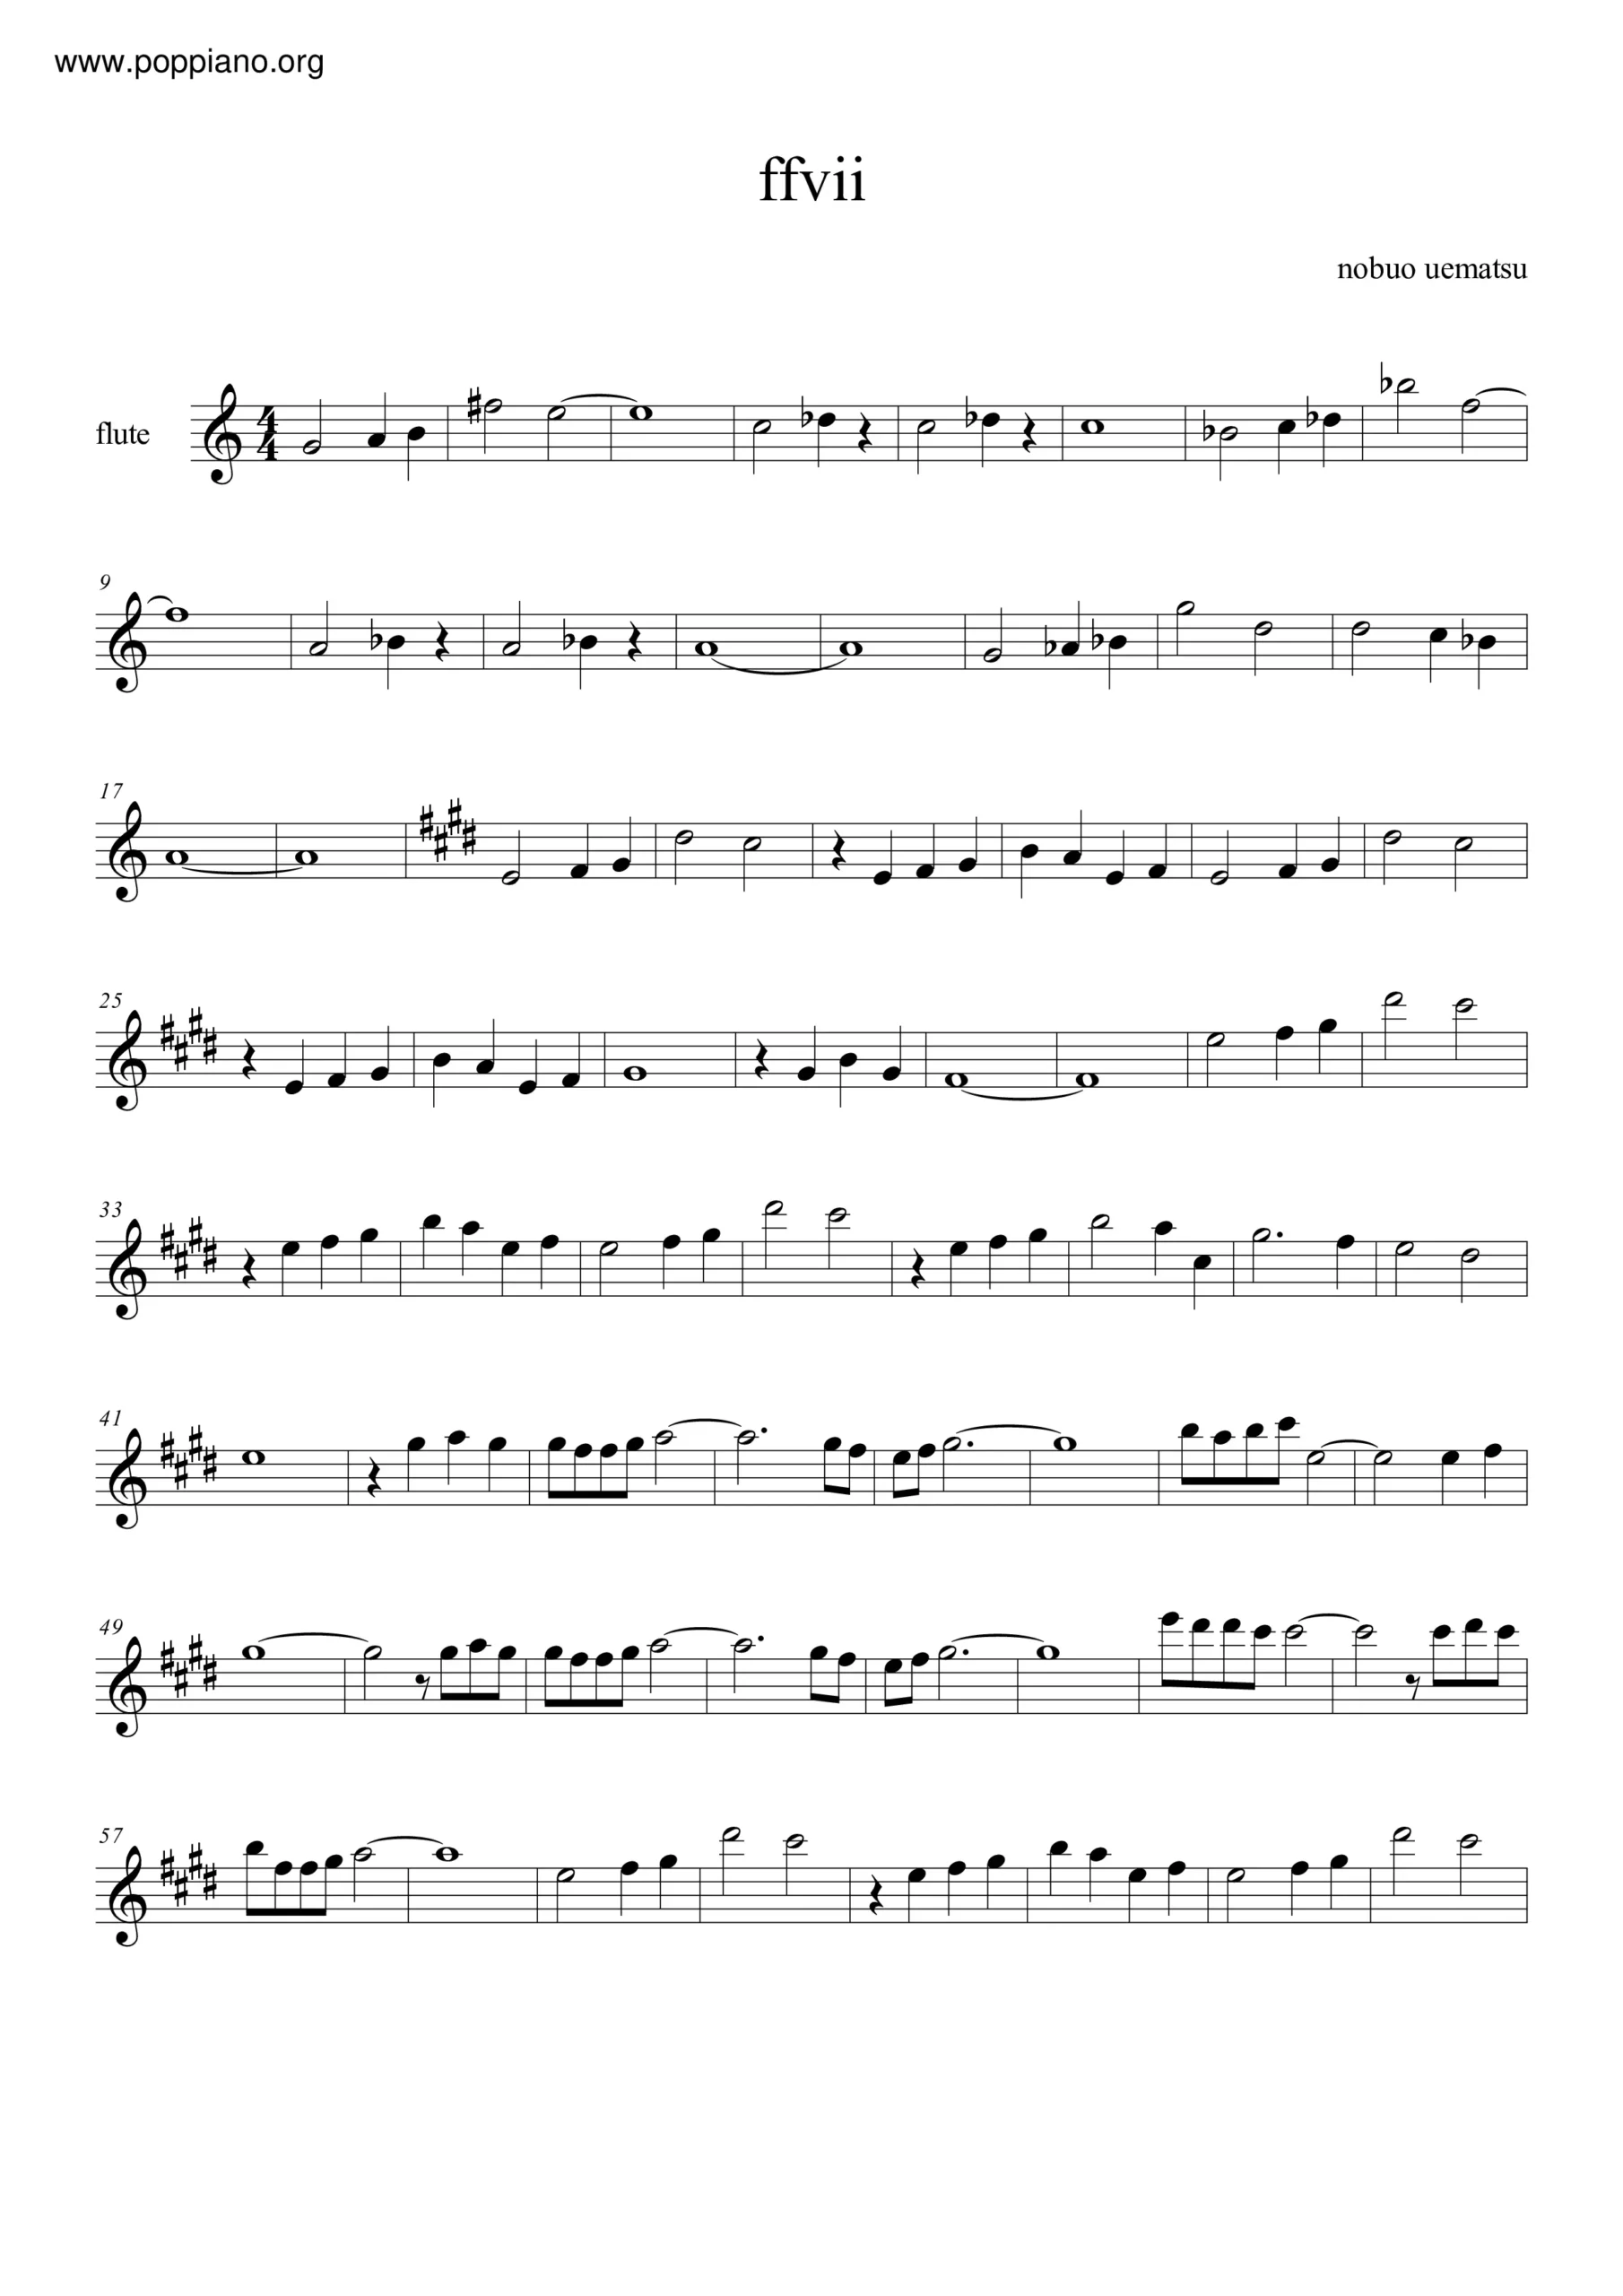 final fantasy violin sheet - Who composed the music for Final Fantasy